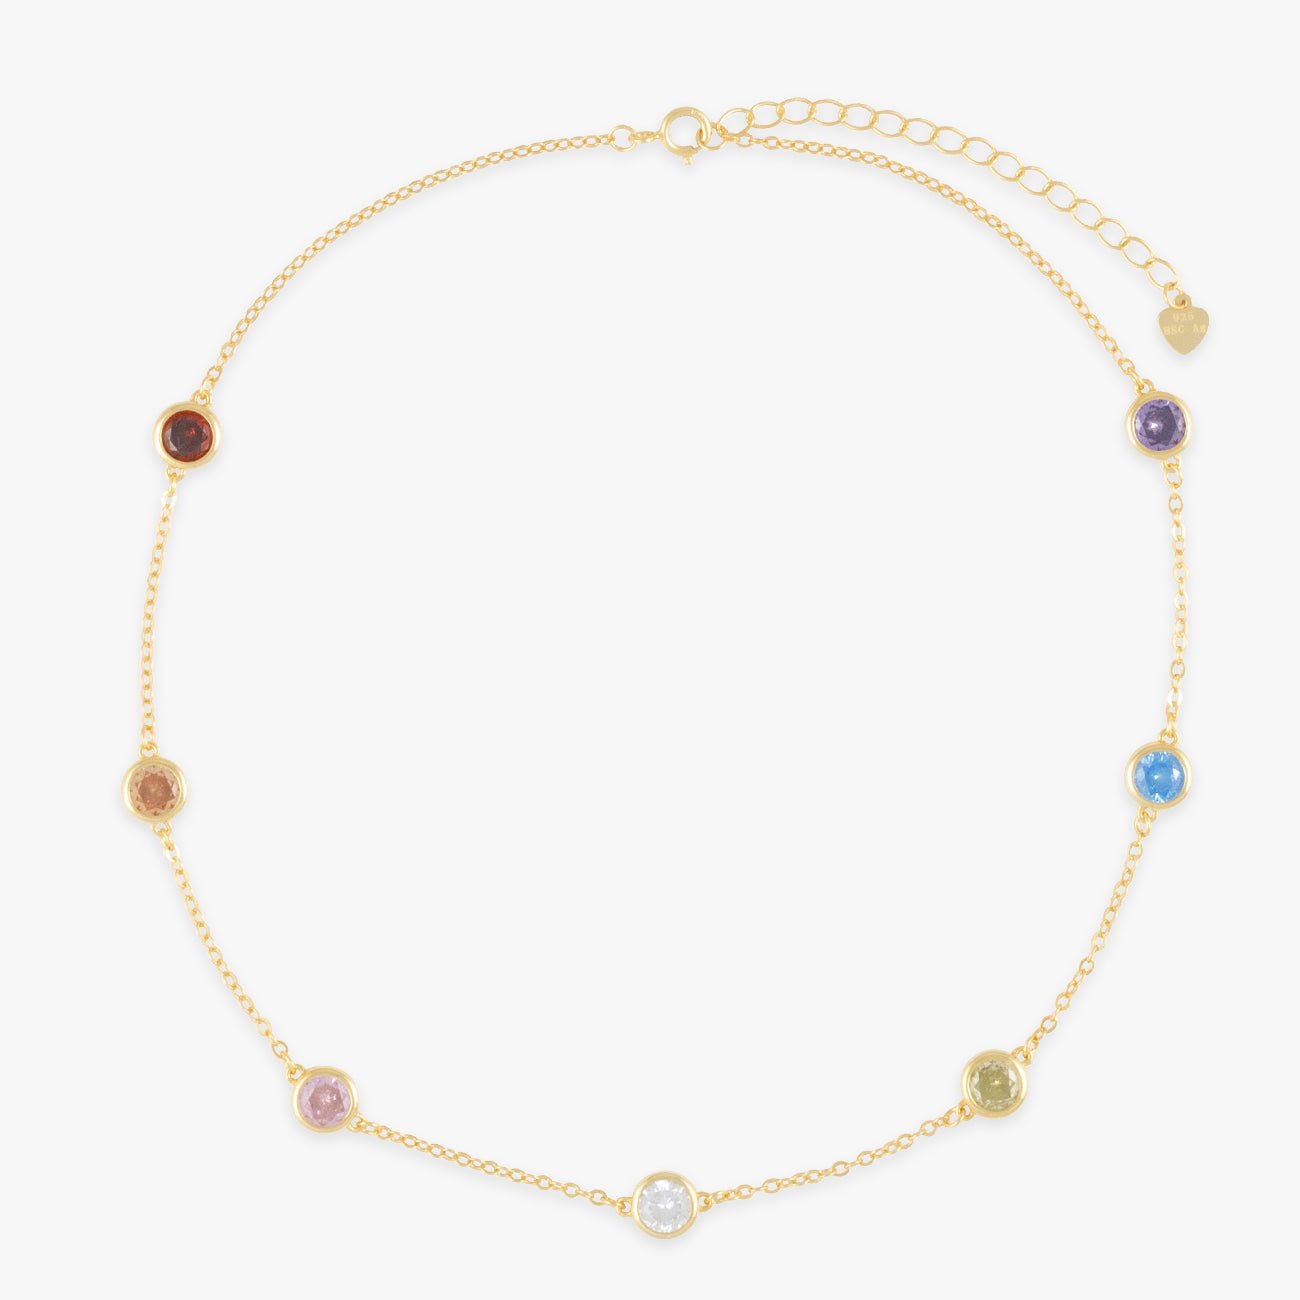 Chakra Necklace with 7 Different Gemstone Colors - Harmony and Energy for Your Neck - Herzschmuck Schweiz